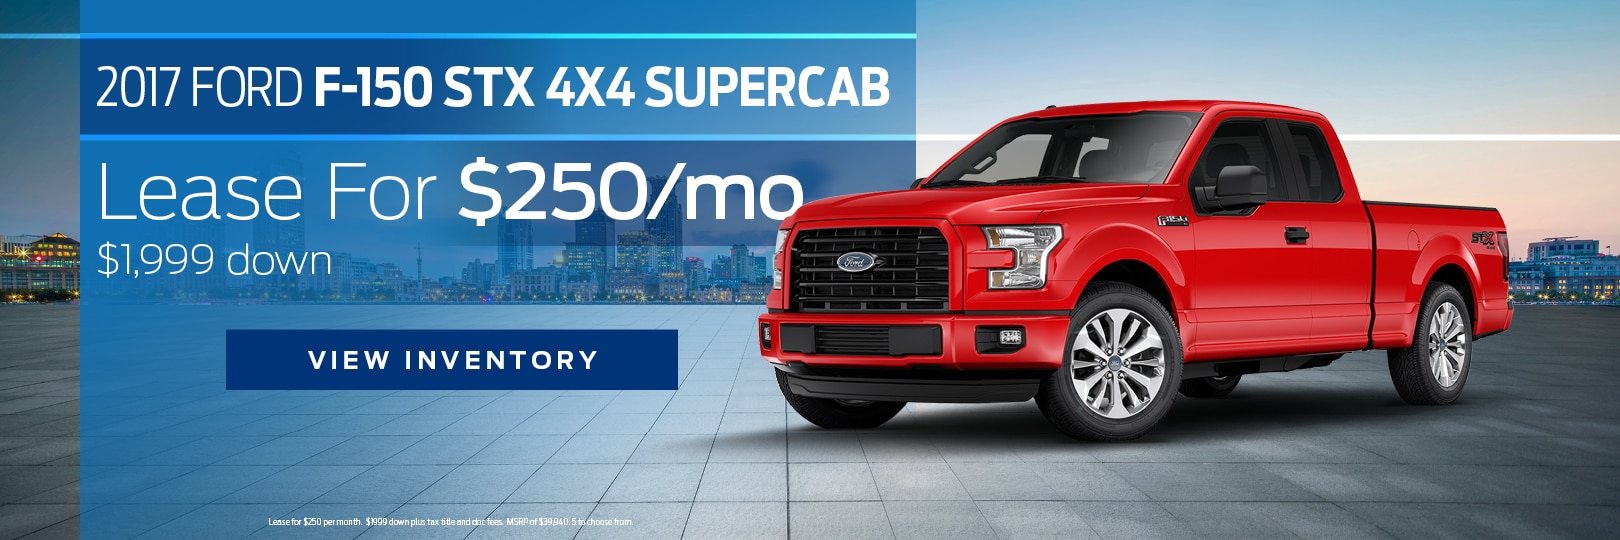 ford-f-150-lease-deals-elyria-oh-mike-bass-ford-specials